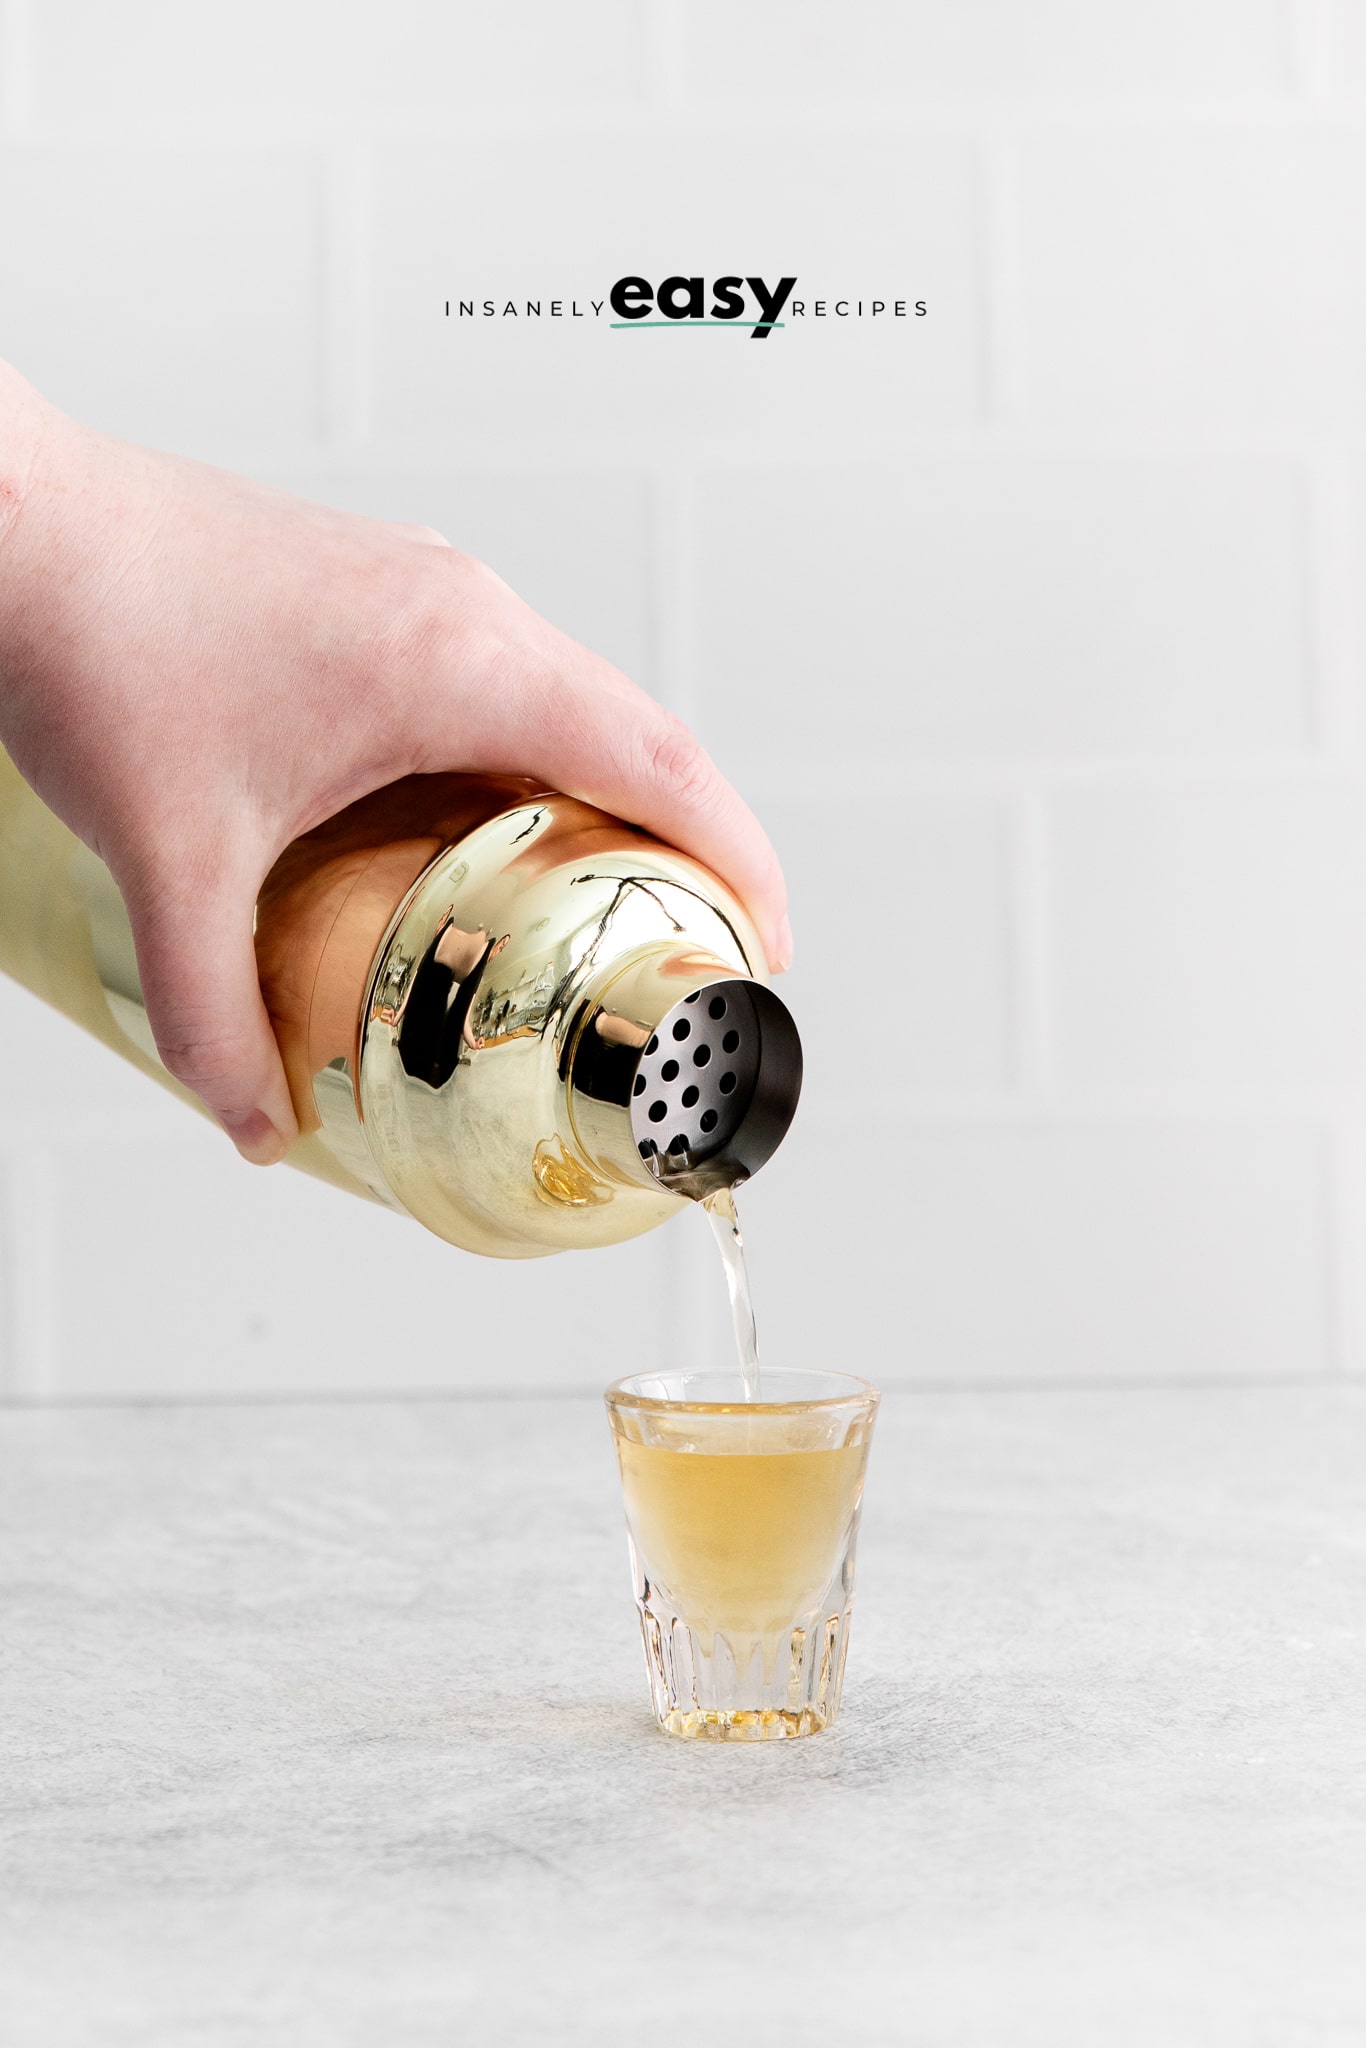 Photo of a hand pouring our a shaken up Peanut Butter Jelly Shot into a shot glass.